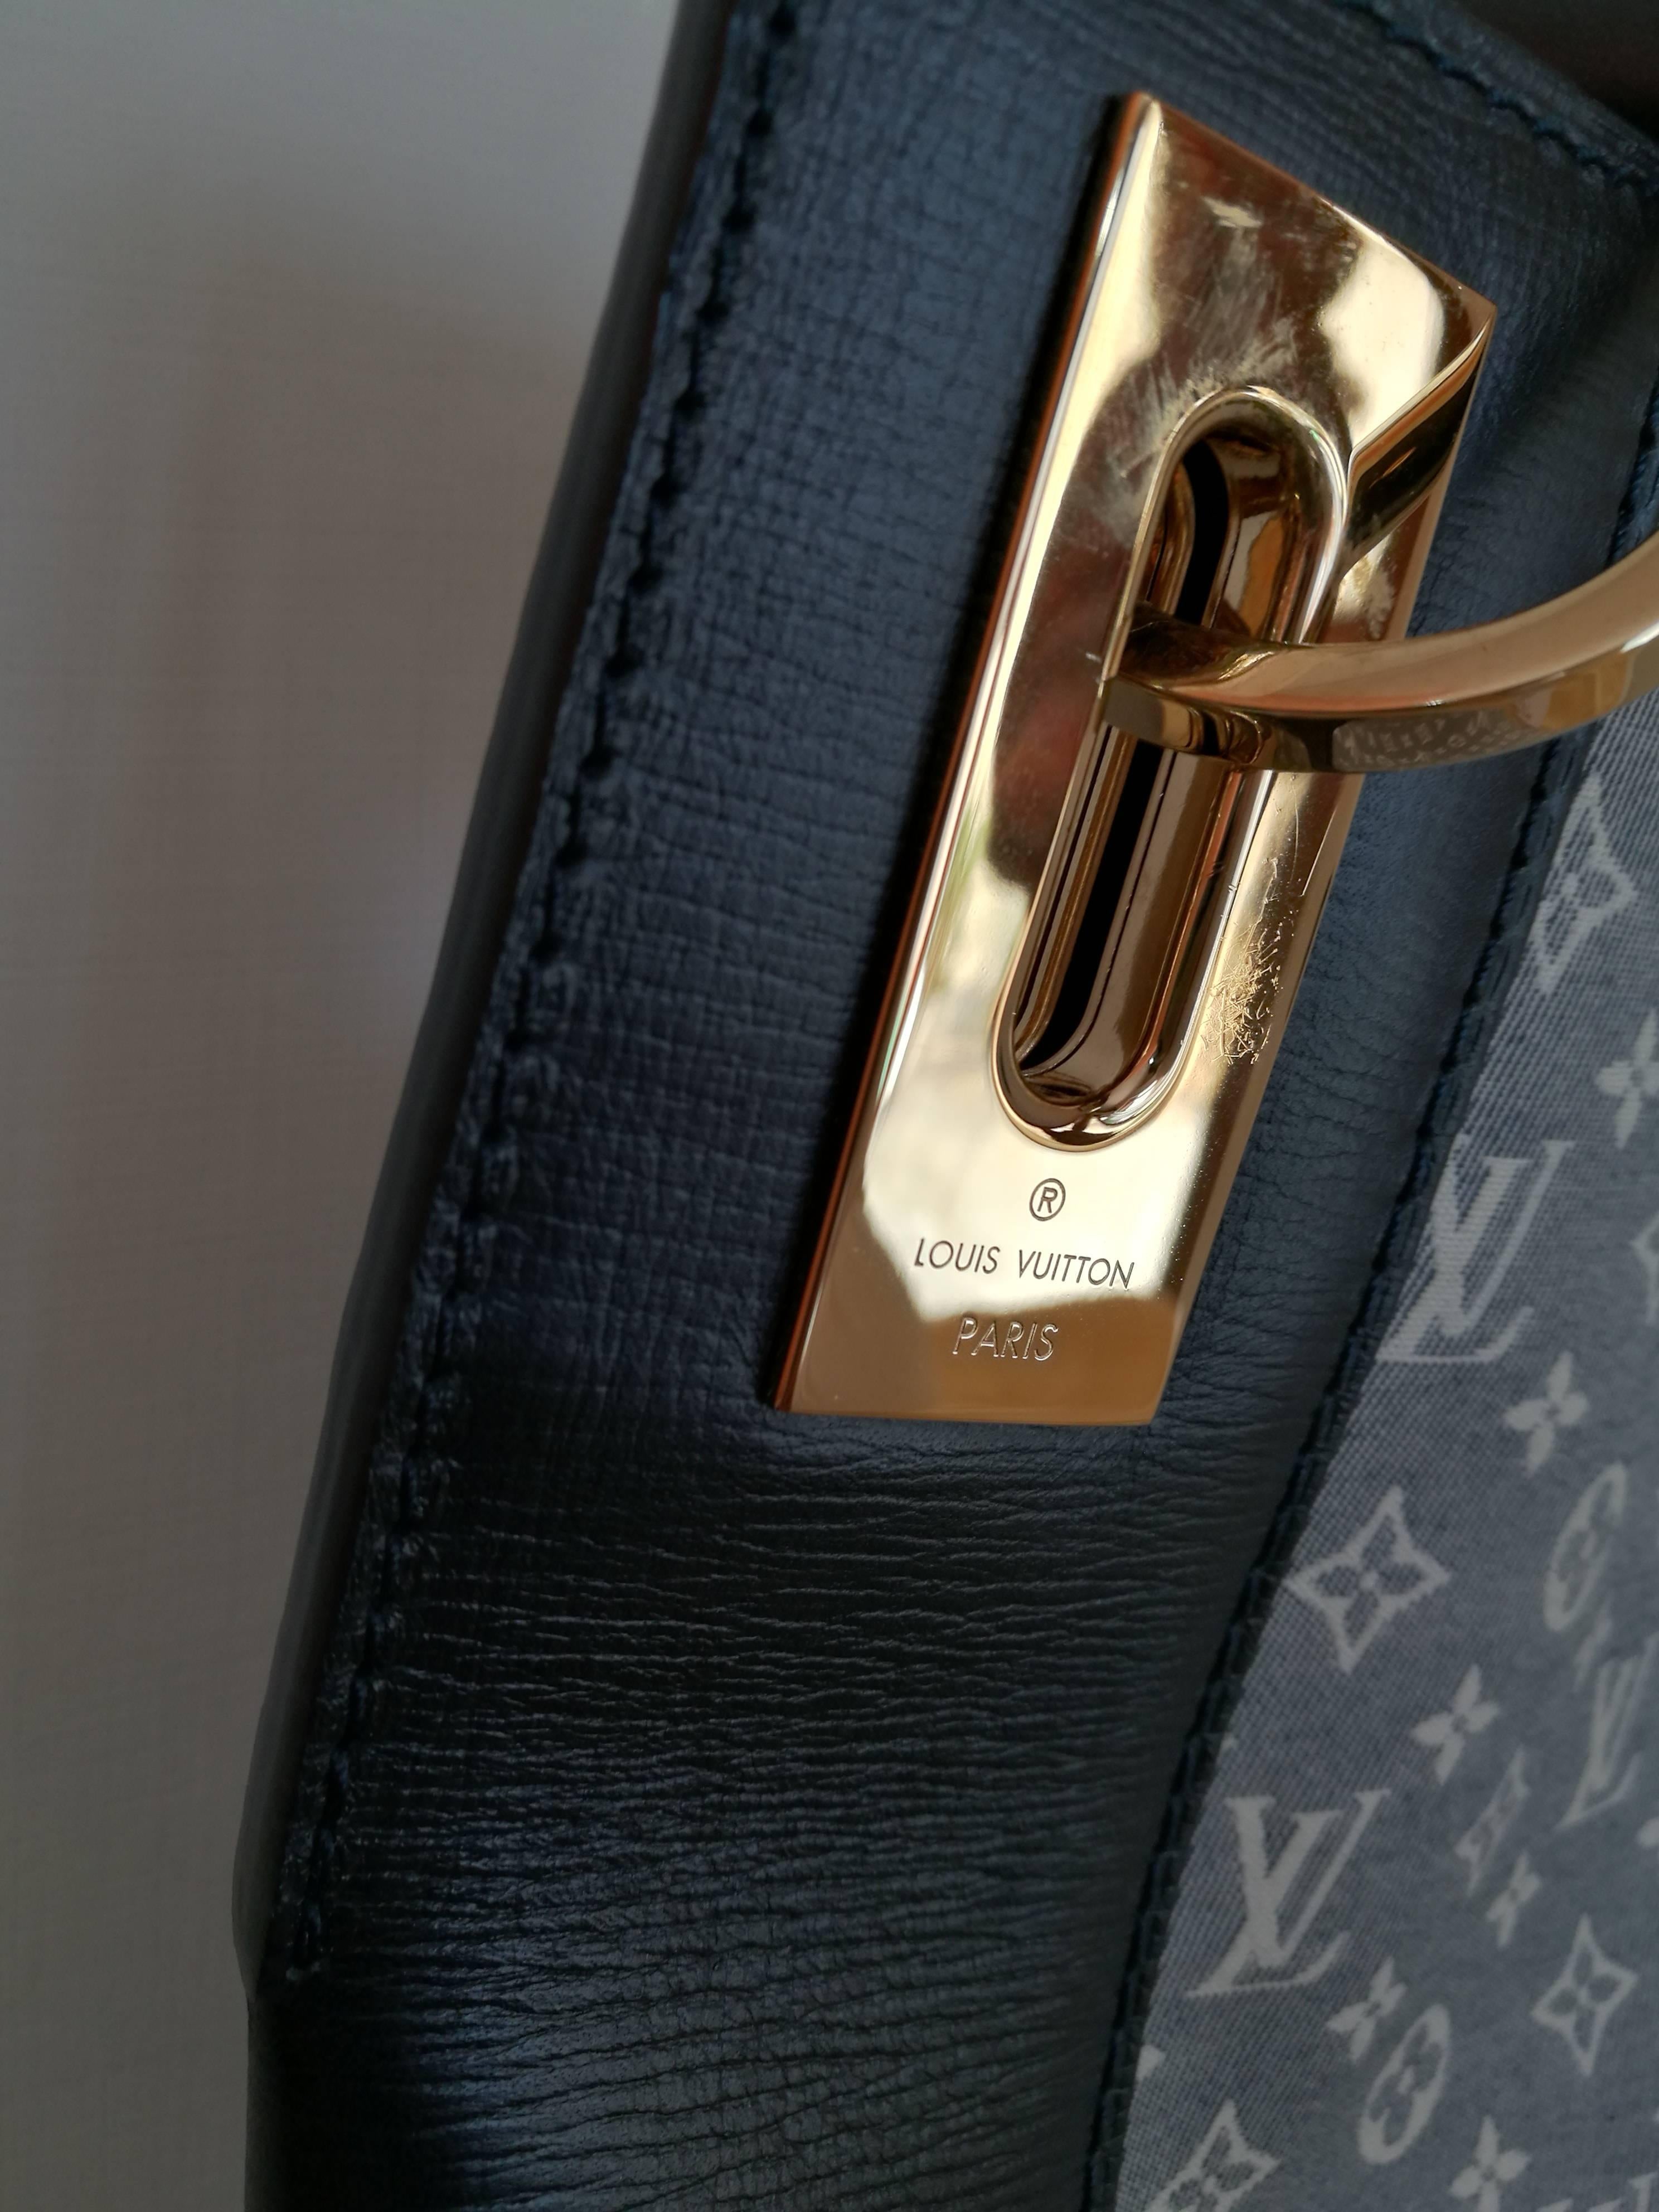 This lovely shoulder bag makes the perfect everyday carry all. Featuring Monogram Idylle jacquard canvas and dark navy blue cowhide leather trimmings, the Rendez-Vous MM is glamorous yet discreet. The doubled leather shoulder strap hangs beautifully